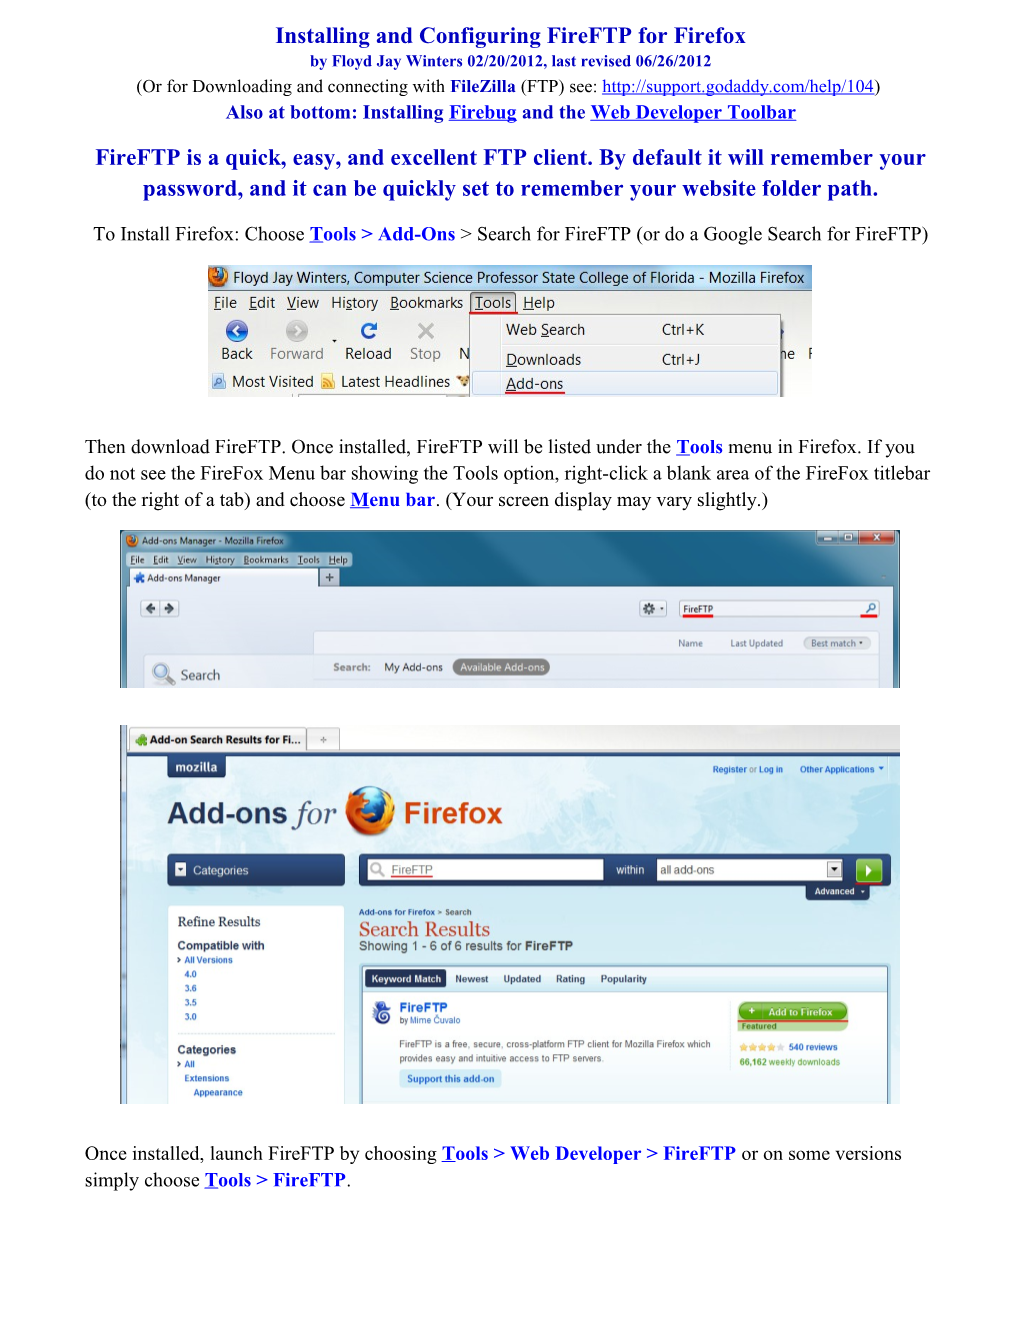 Installing and Configuring Fireftp for Firefox by Floyd Jay Winters 02/20/2012, Last Revised